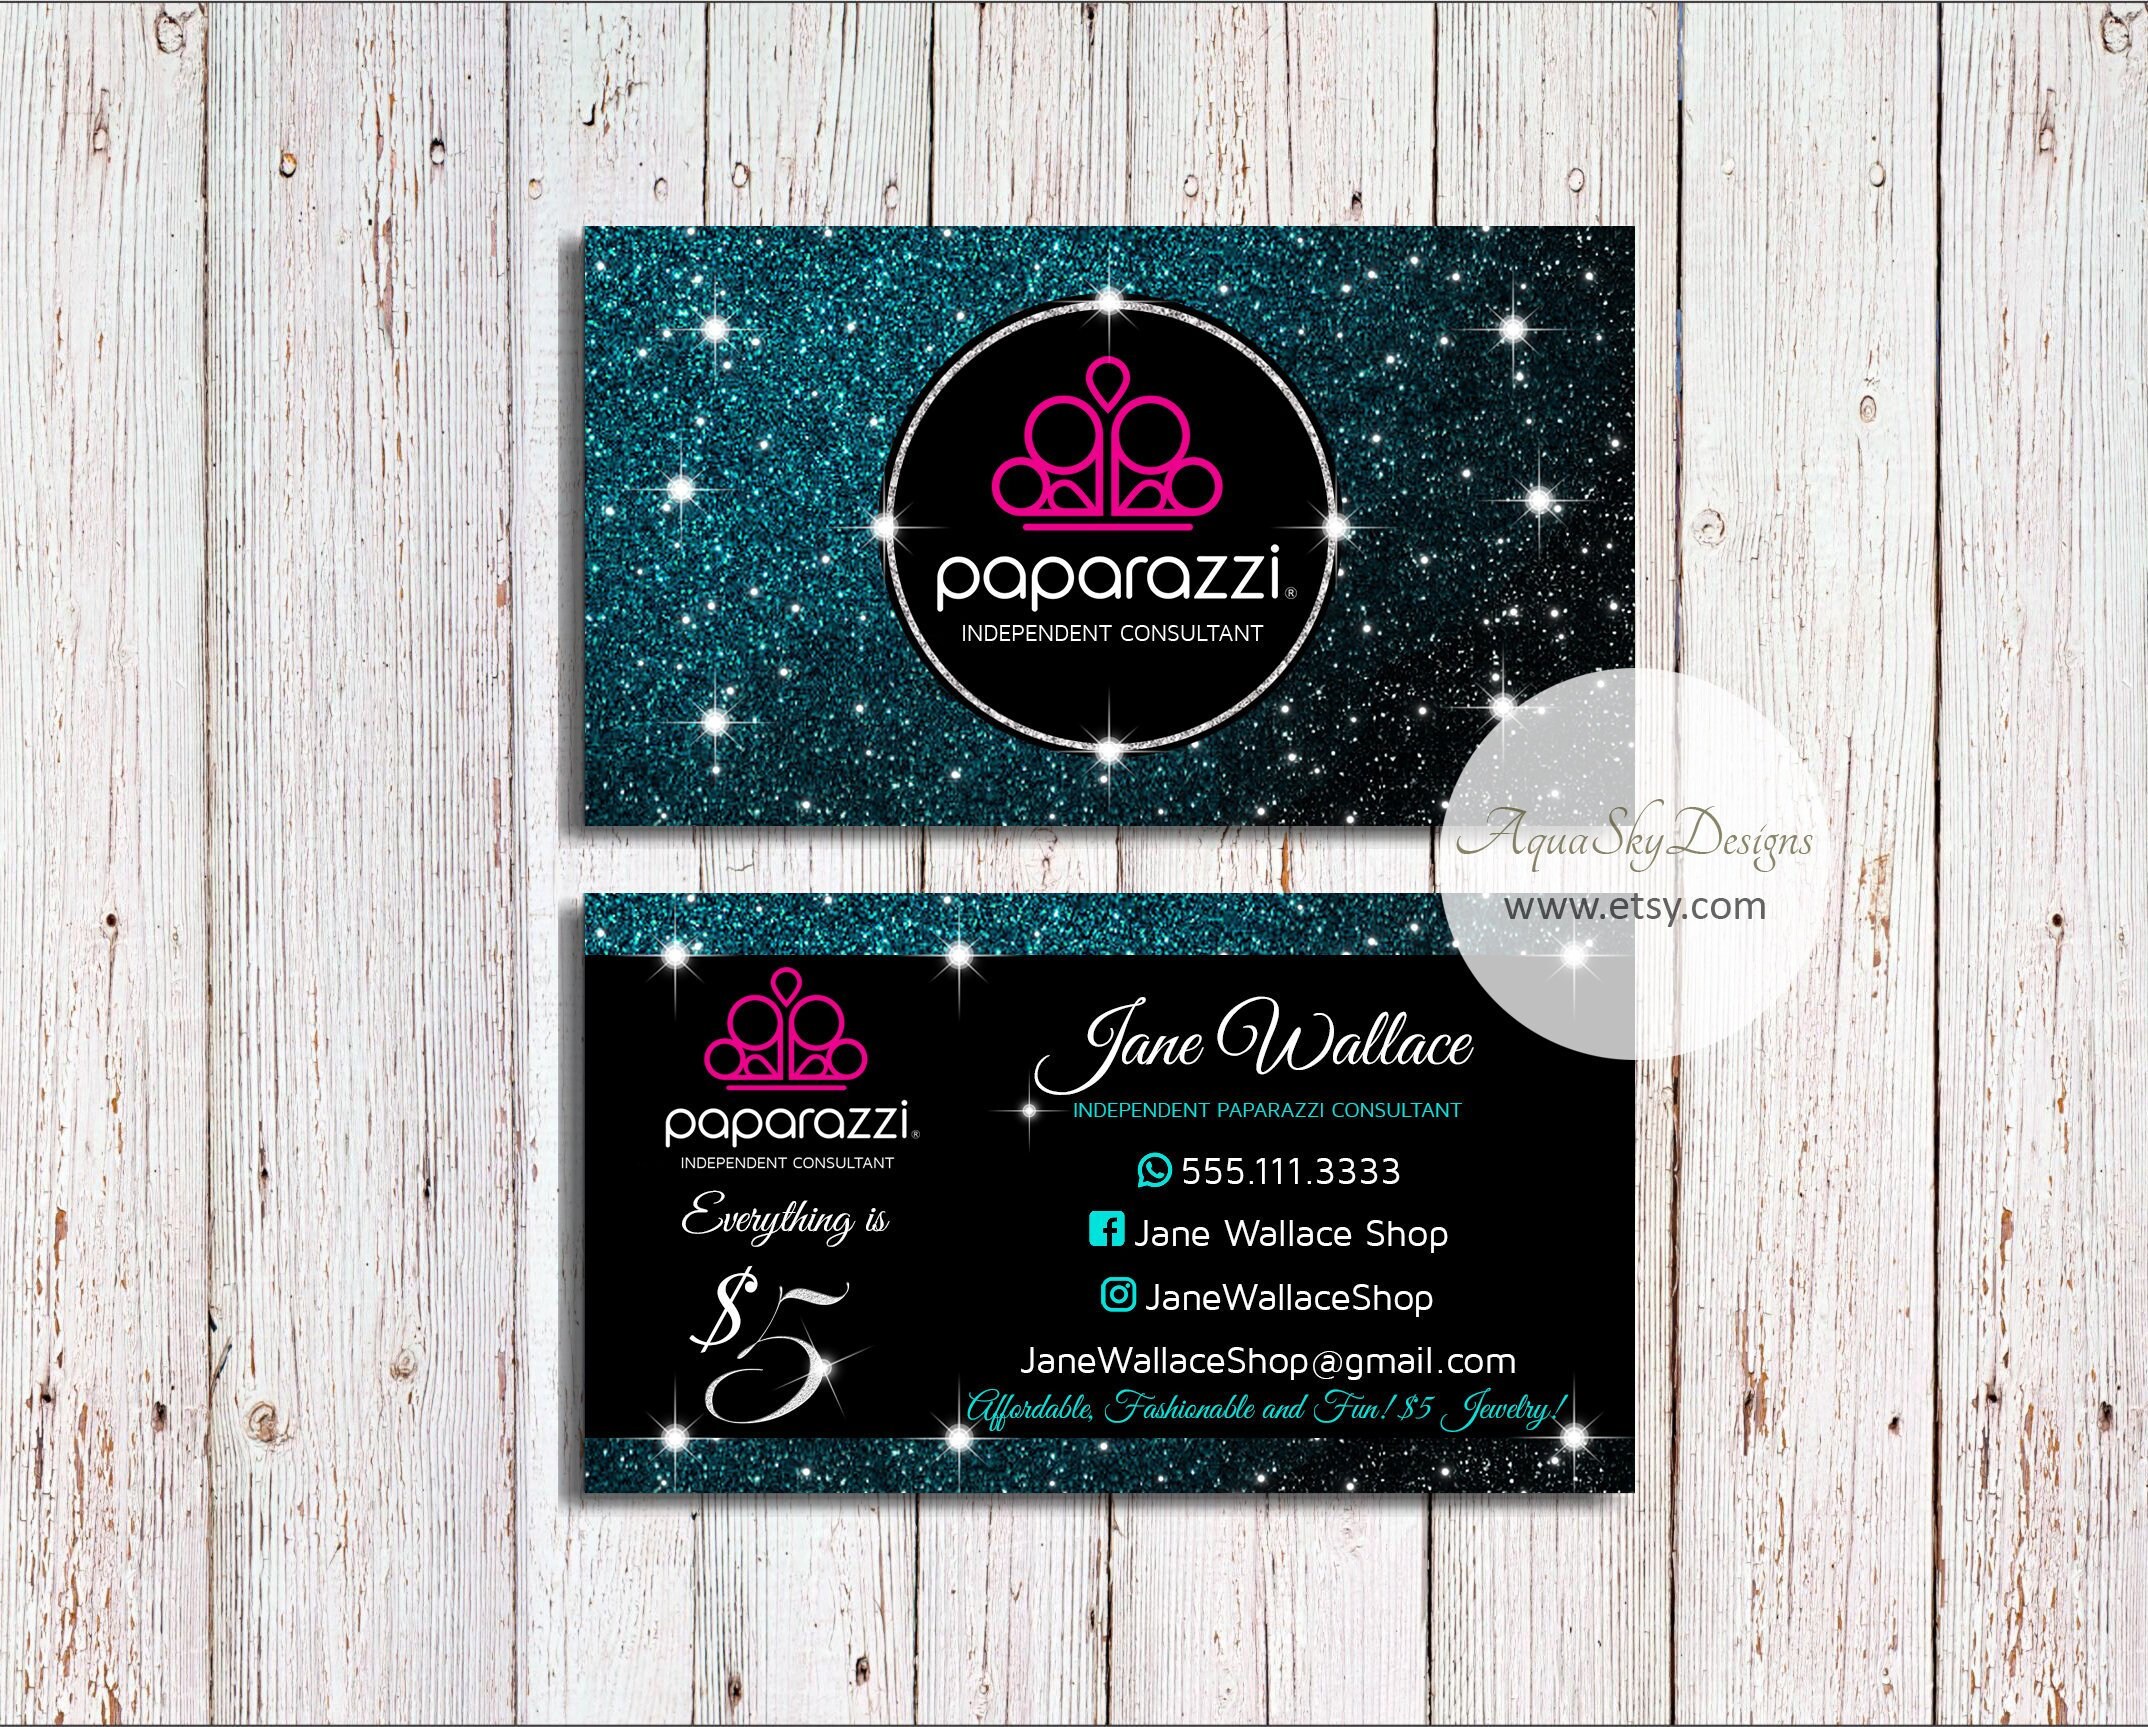 Paparazzi Business Cards Teal Blue Paparazzi Business Card | Etsy